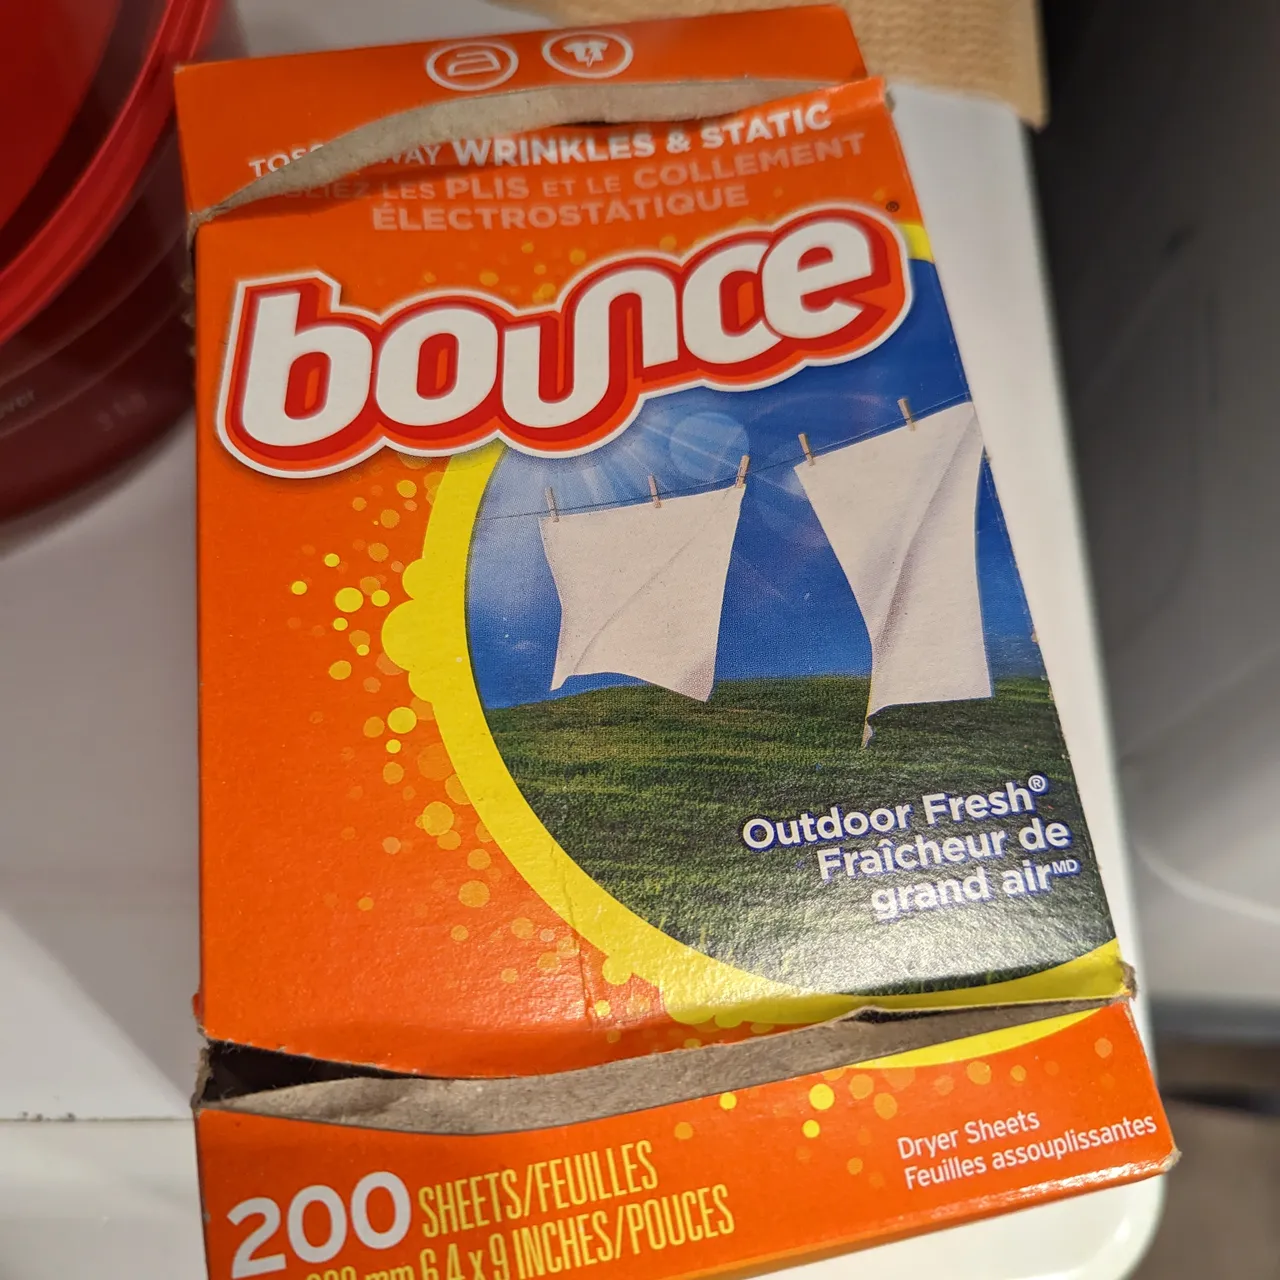 Bounce dryer sheets photo 1